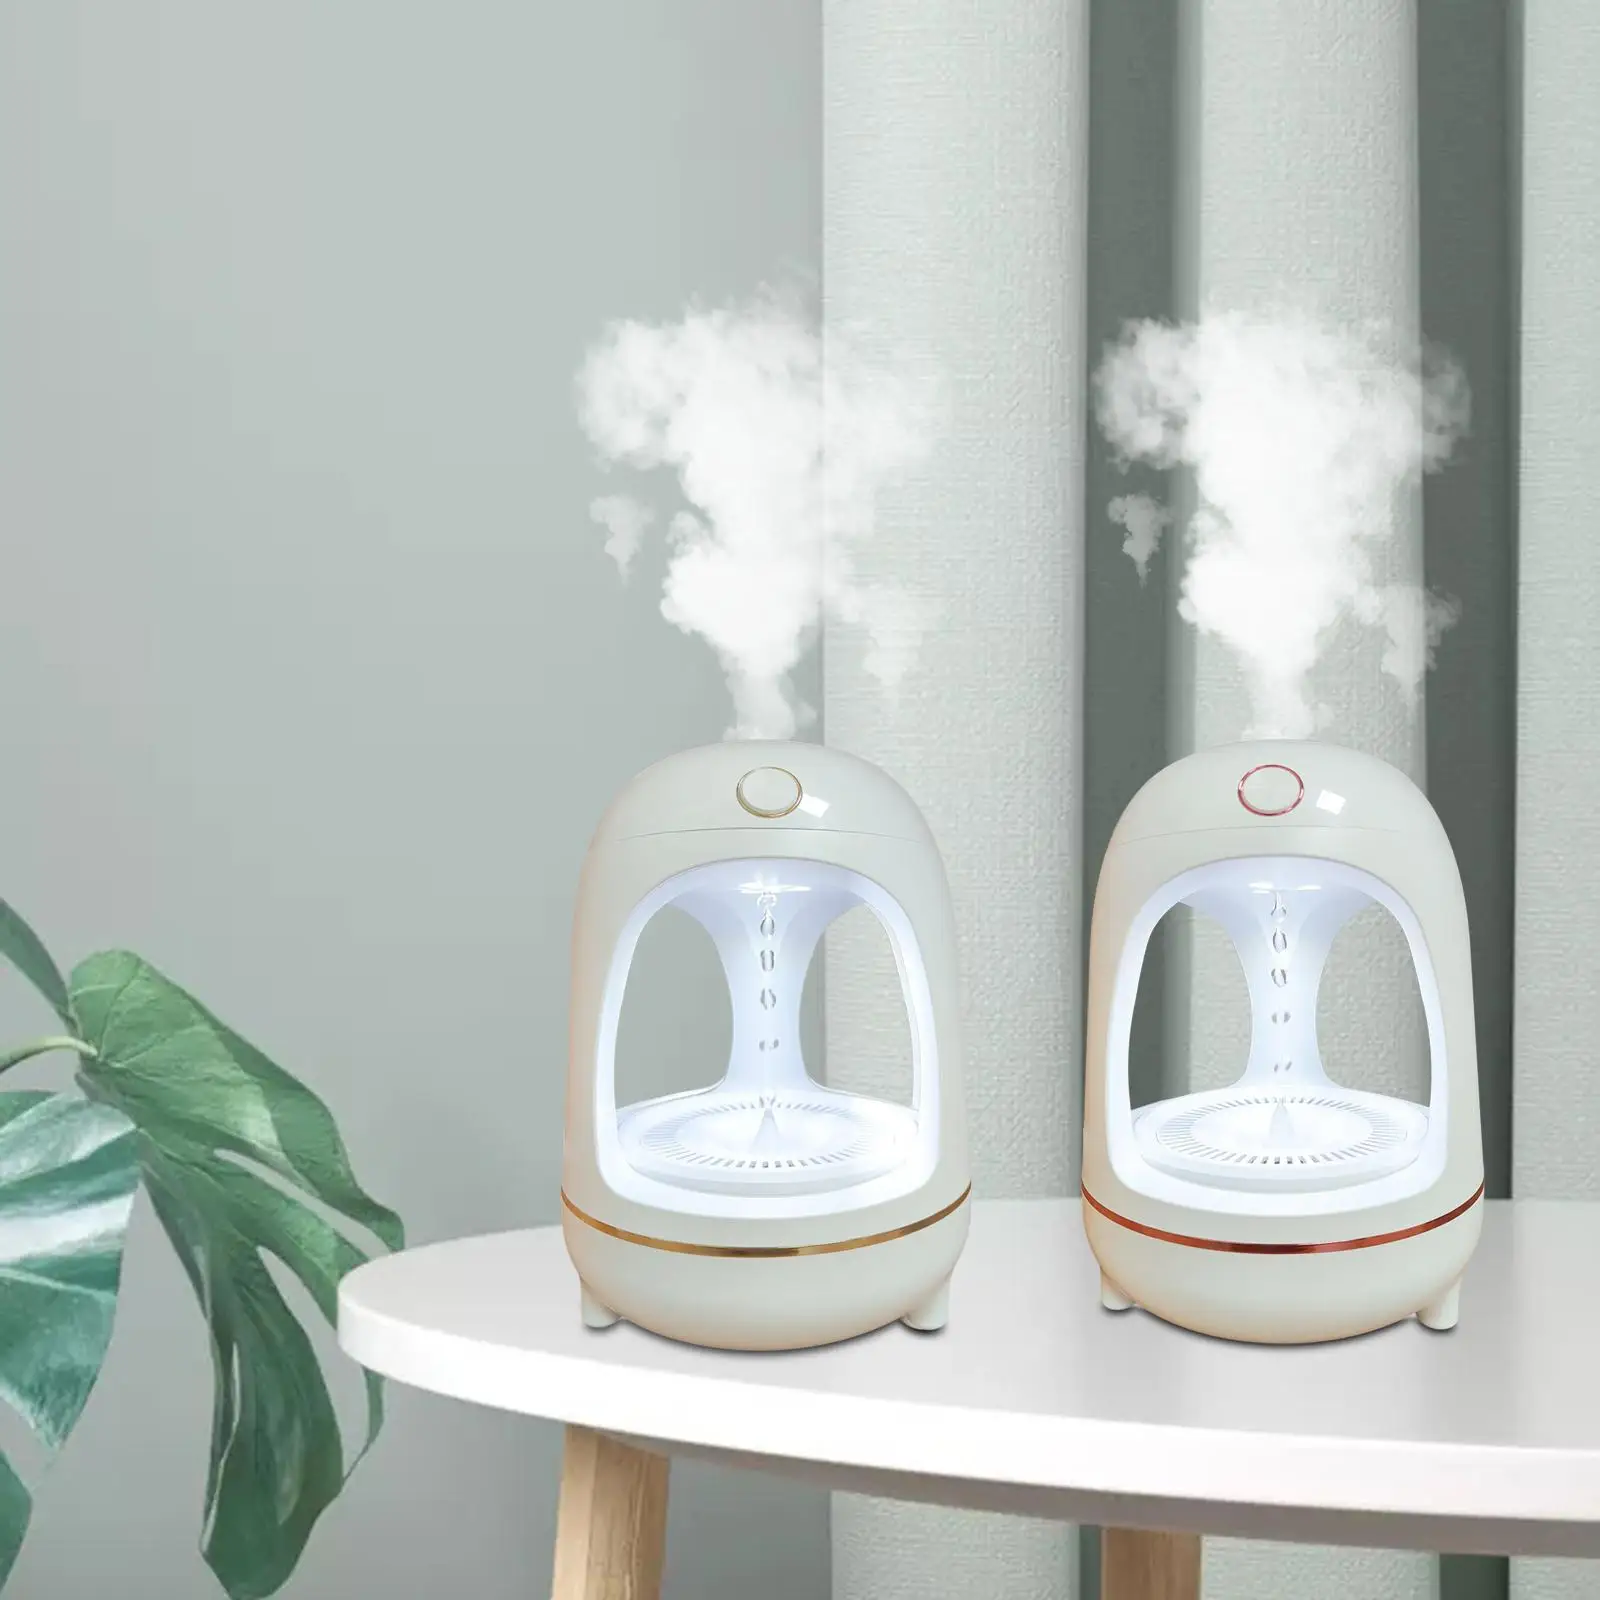 Personal Desktop Air Humidifier Antigravity Large Capacity with Color Changing Light Quiet USB for Yoga Hotel Indoor